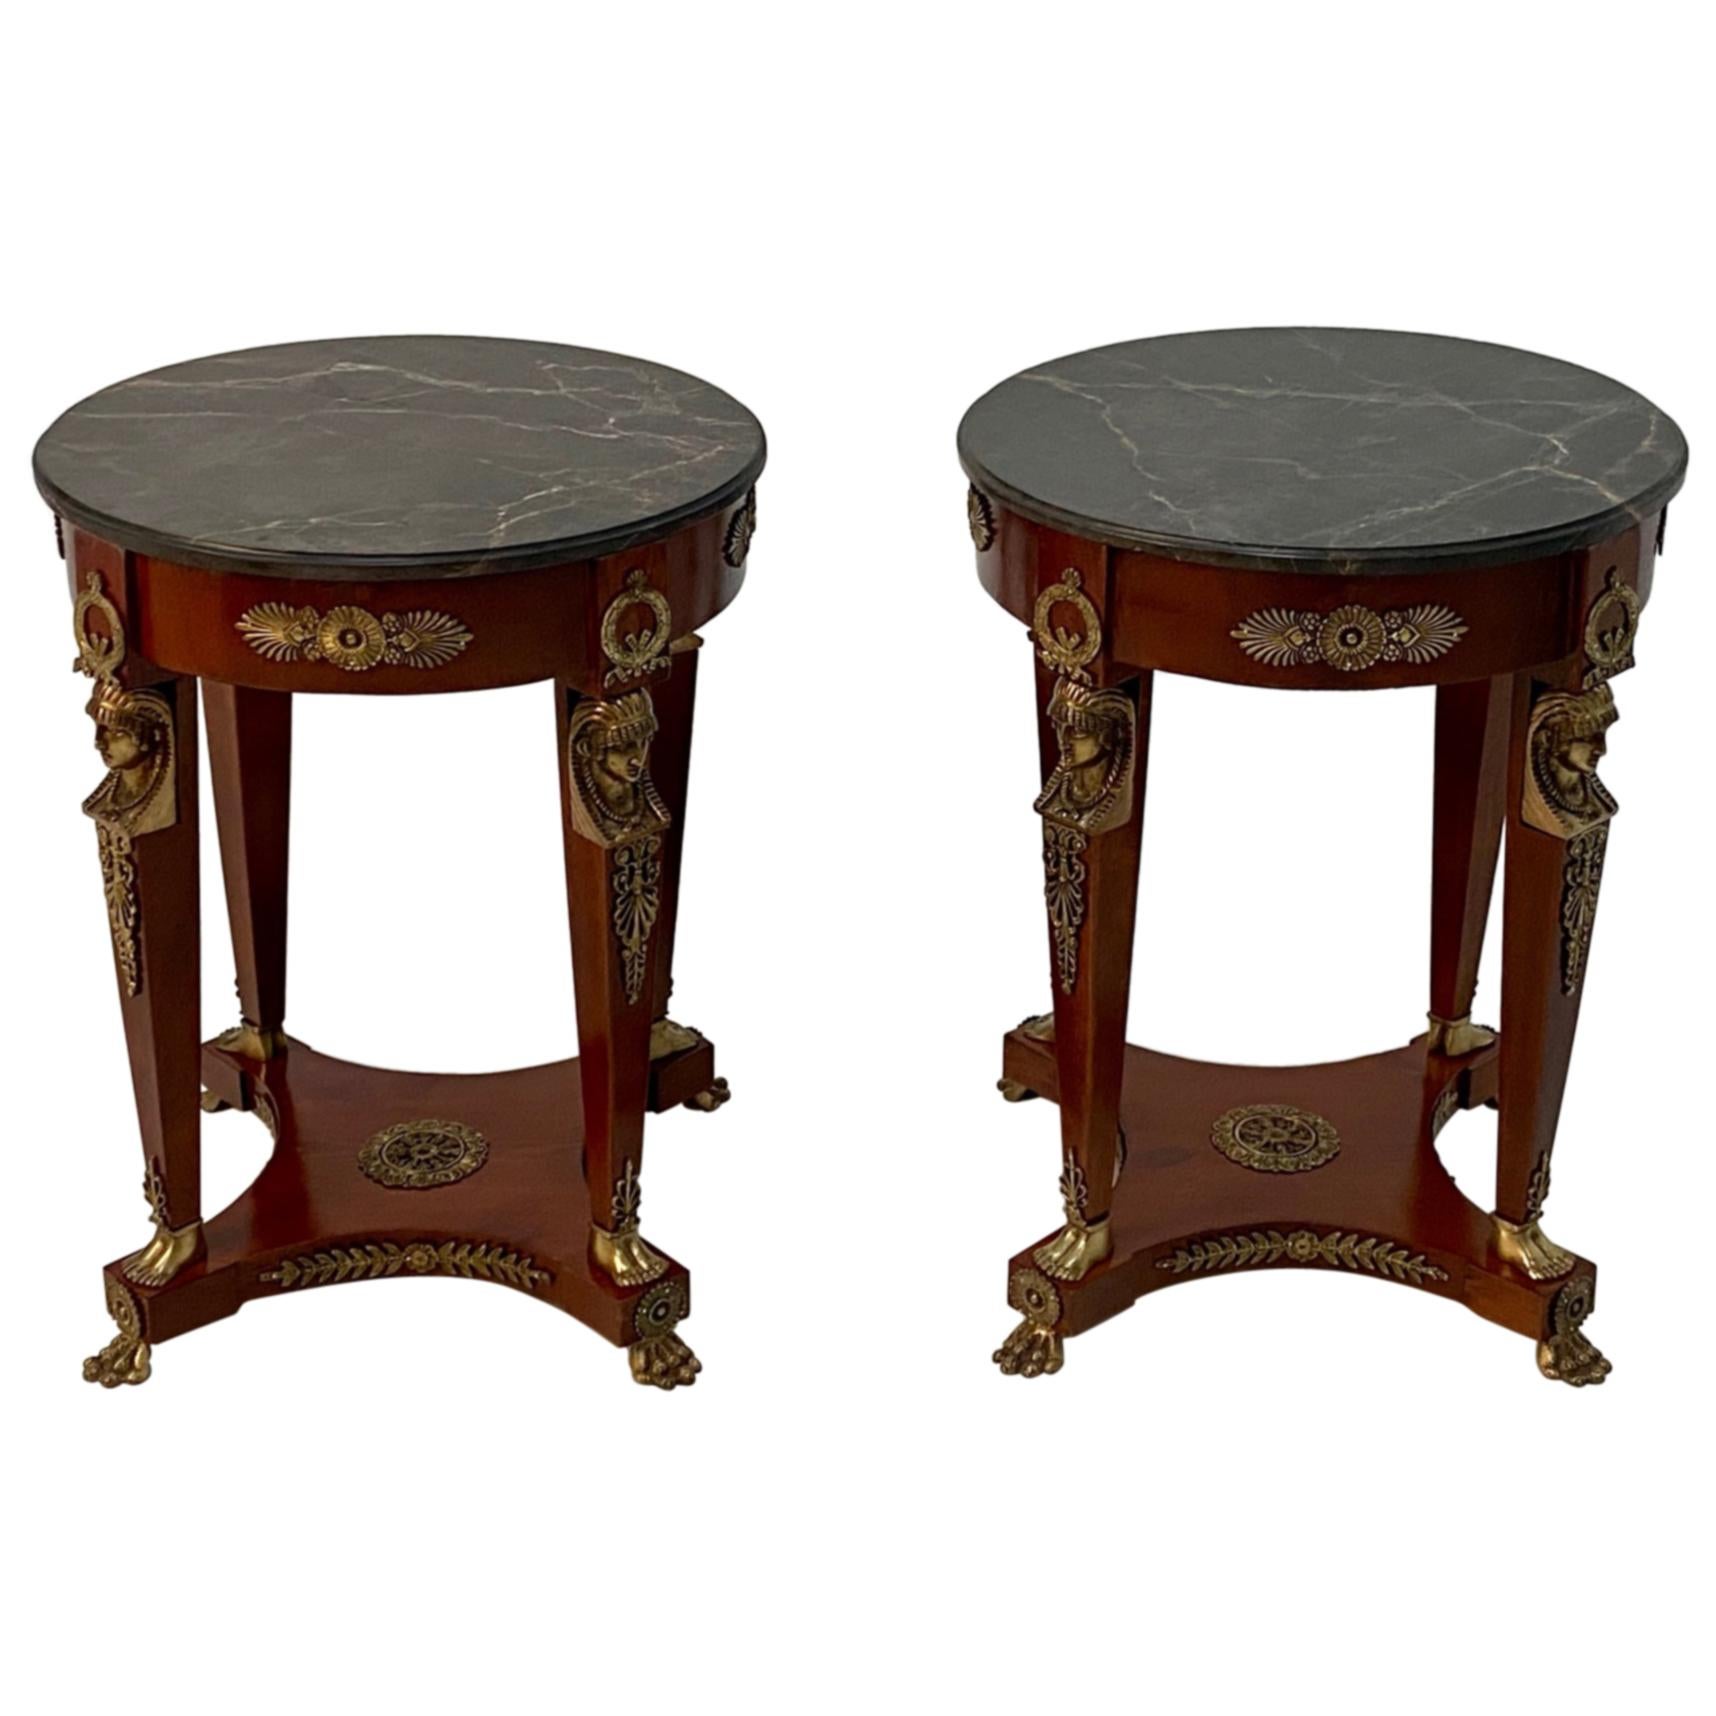 Superb Ornate Pair of Mahogany and Bronze French Empire Style End Tables